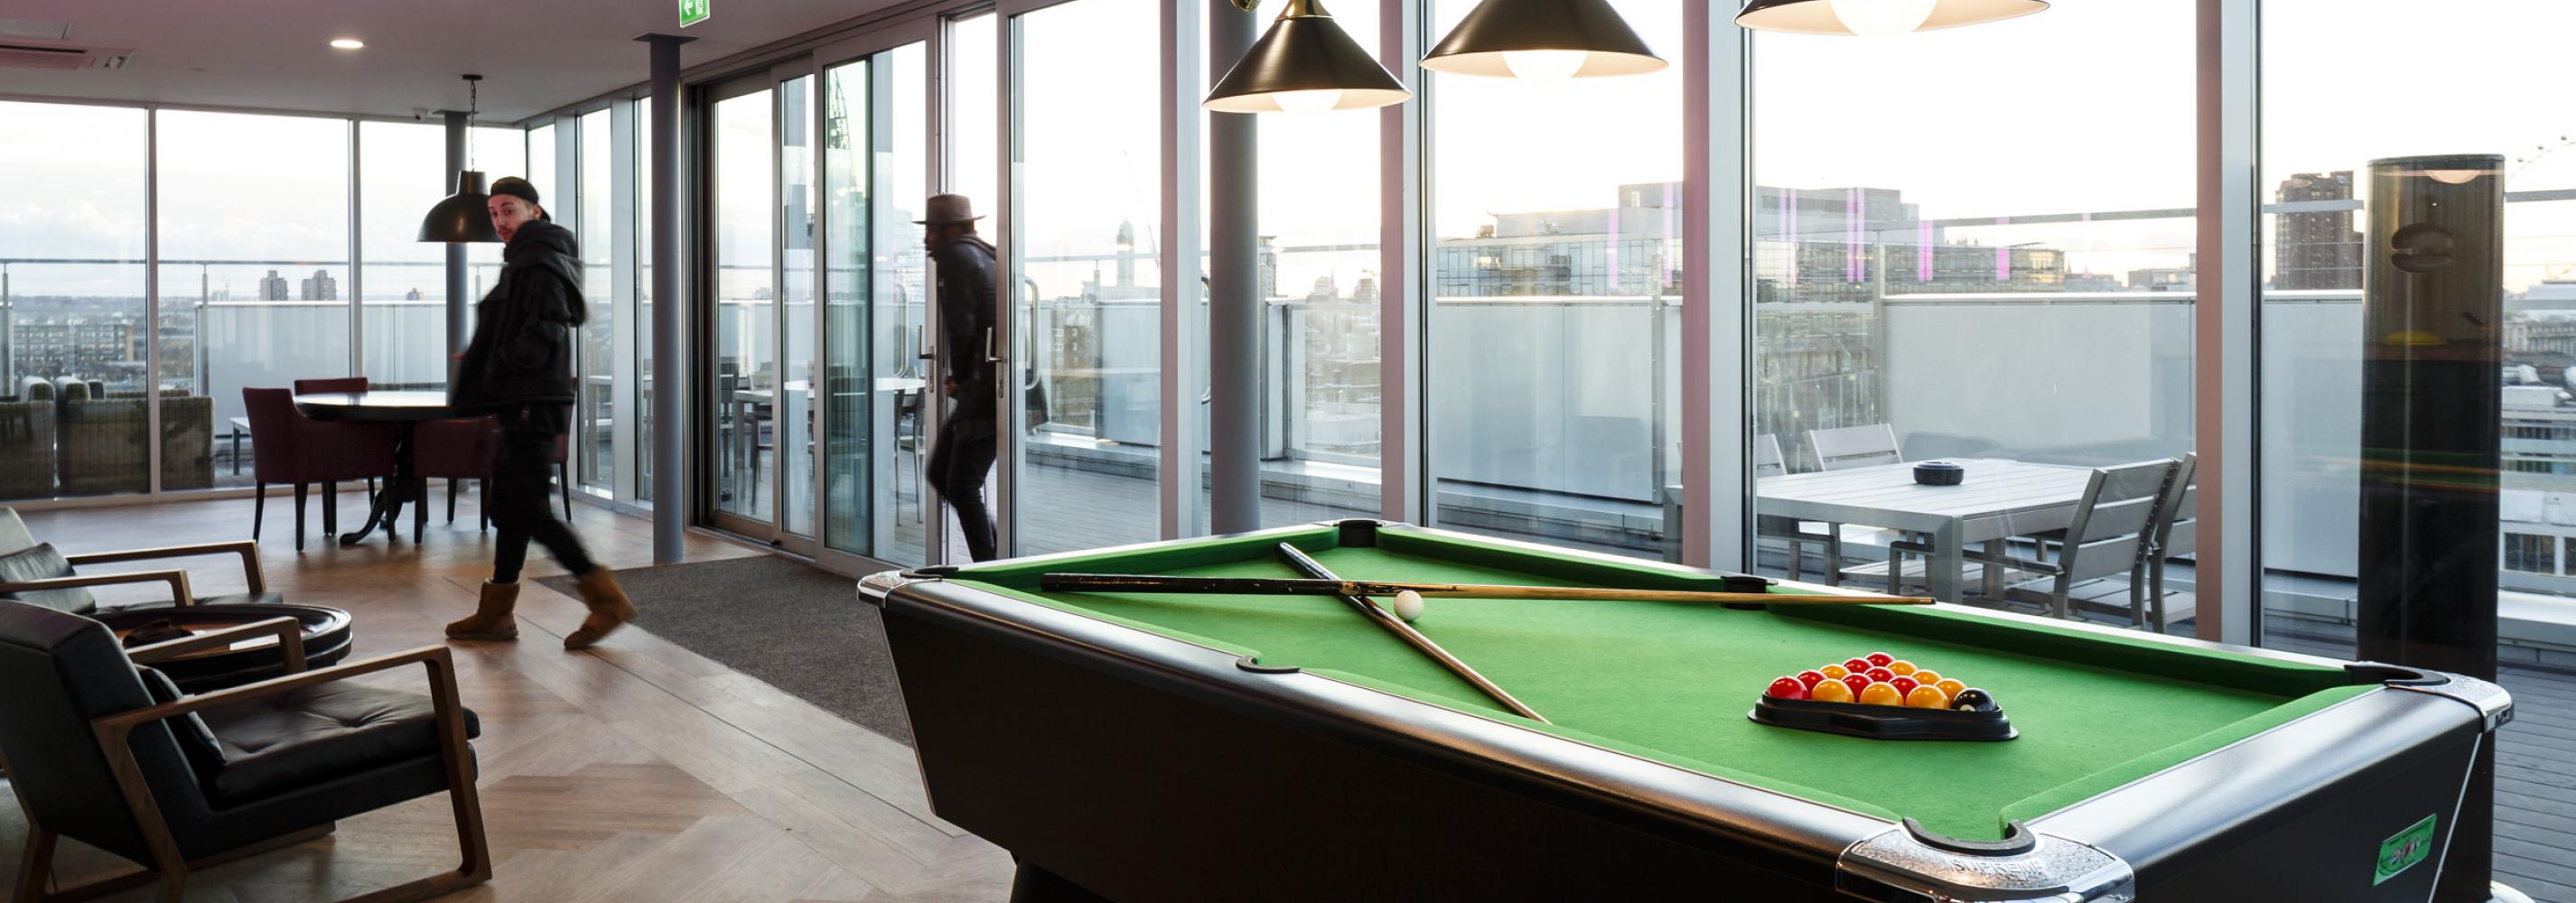 Communal area with pool table